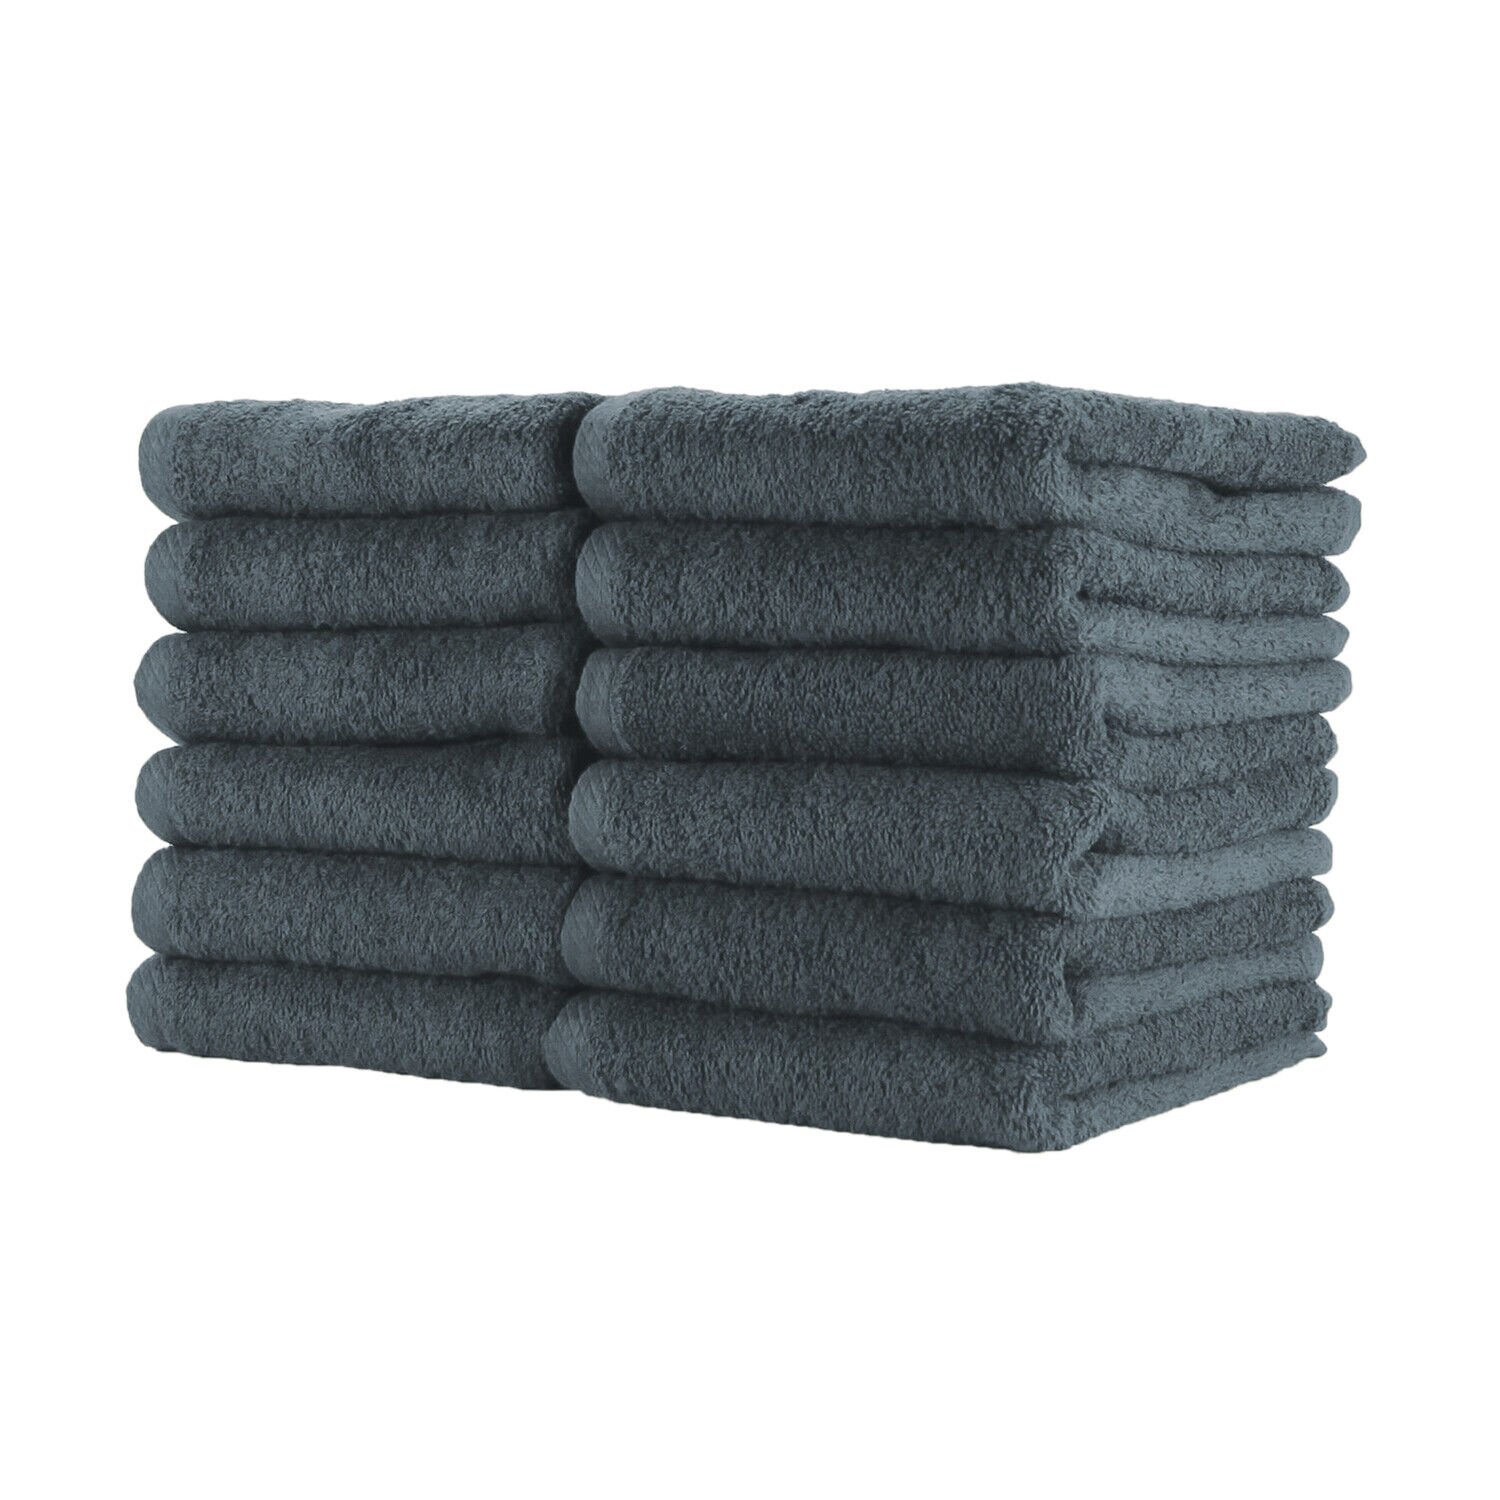 Salon Towels - Packs of 12 - Bleach Safe 16 x 27 Cotton Towel - Color Options  Arkwright Does Not Apply